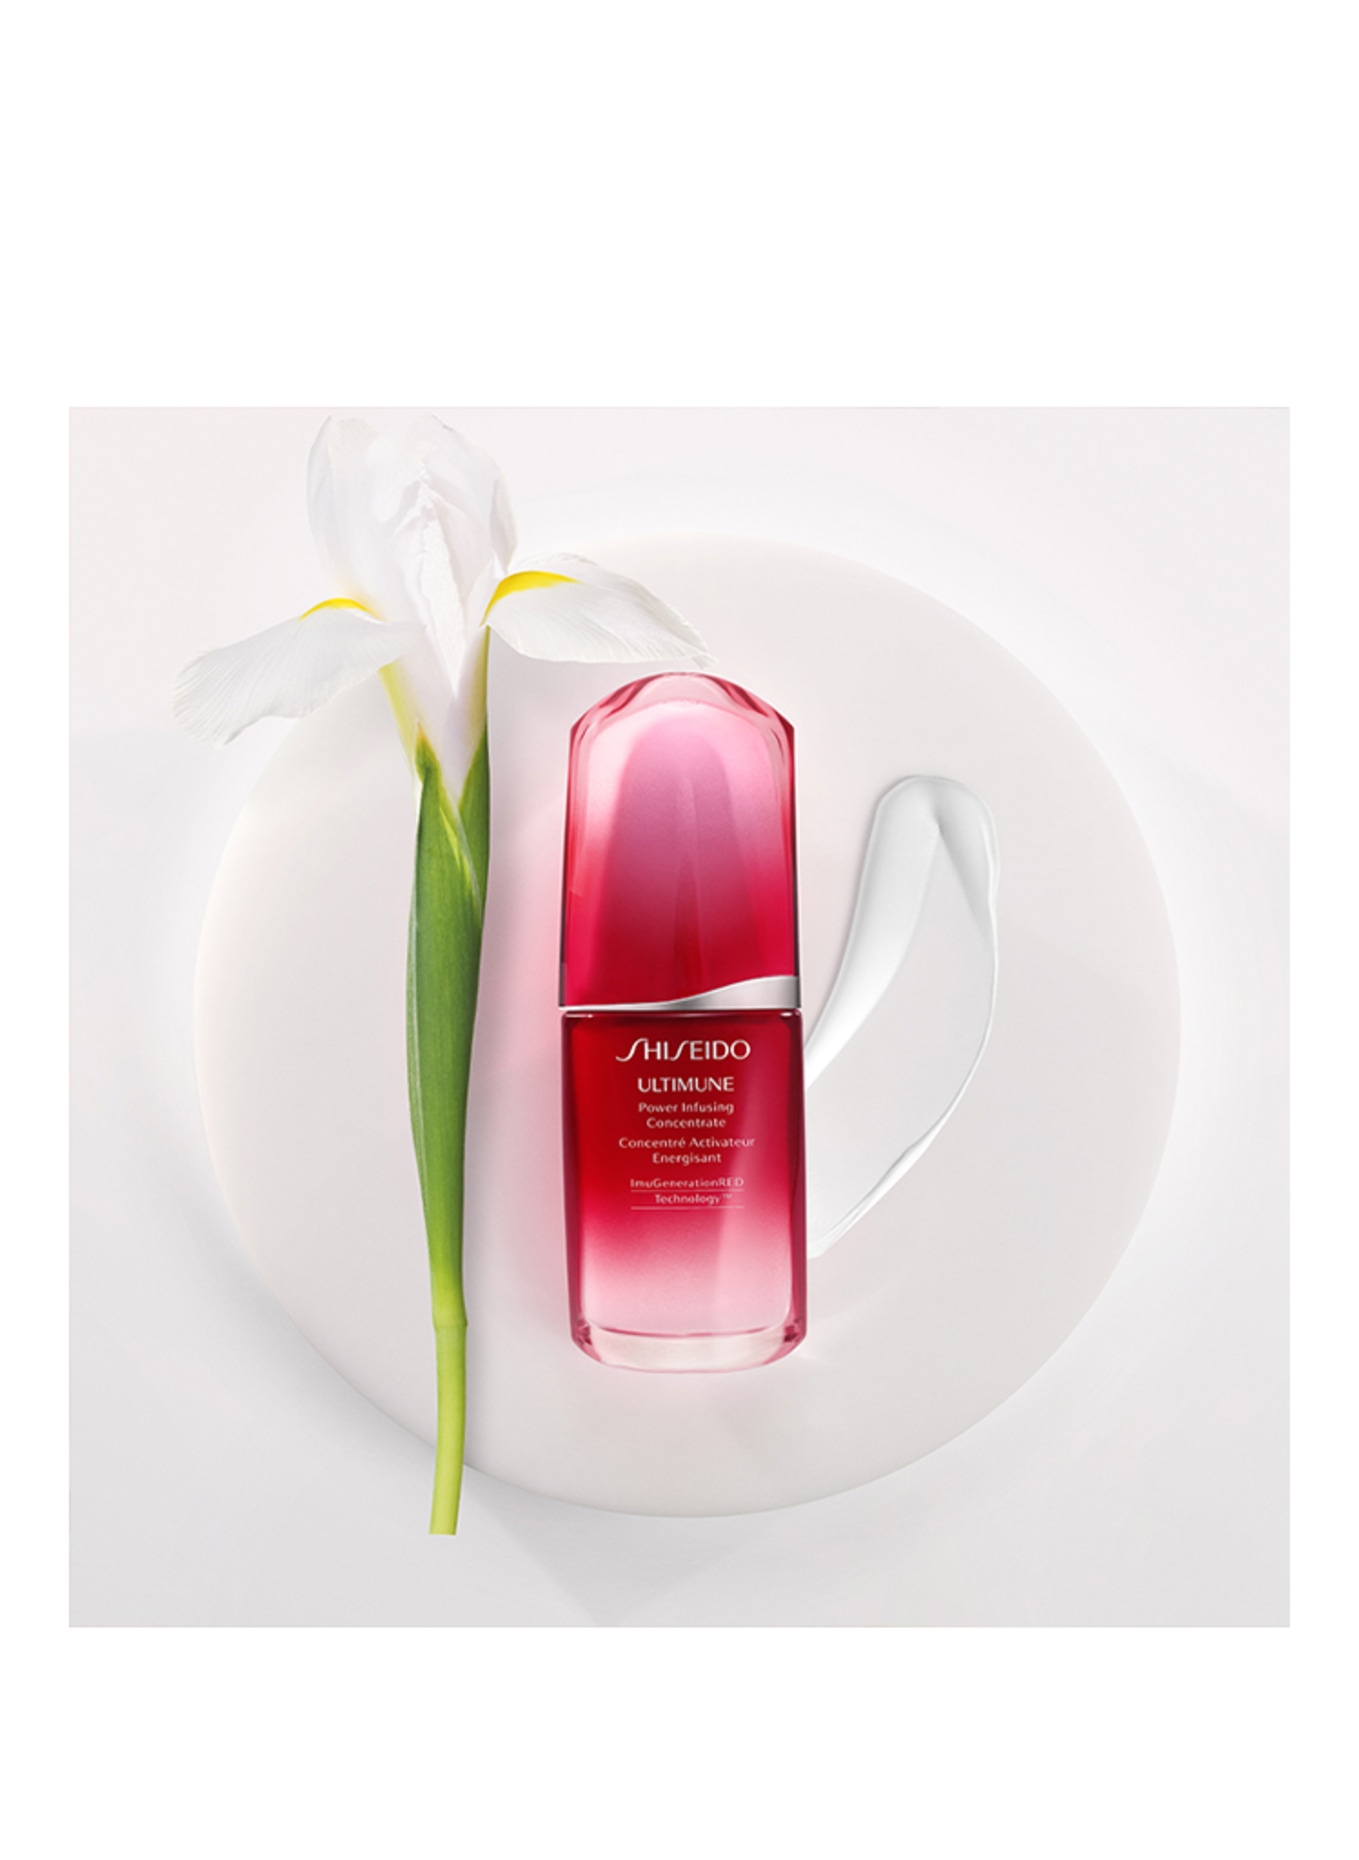 SHISEIDO ULTIMUNE POWER INFUSING CONCENTRATE (Bild 3)